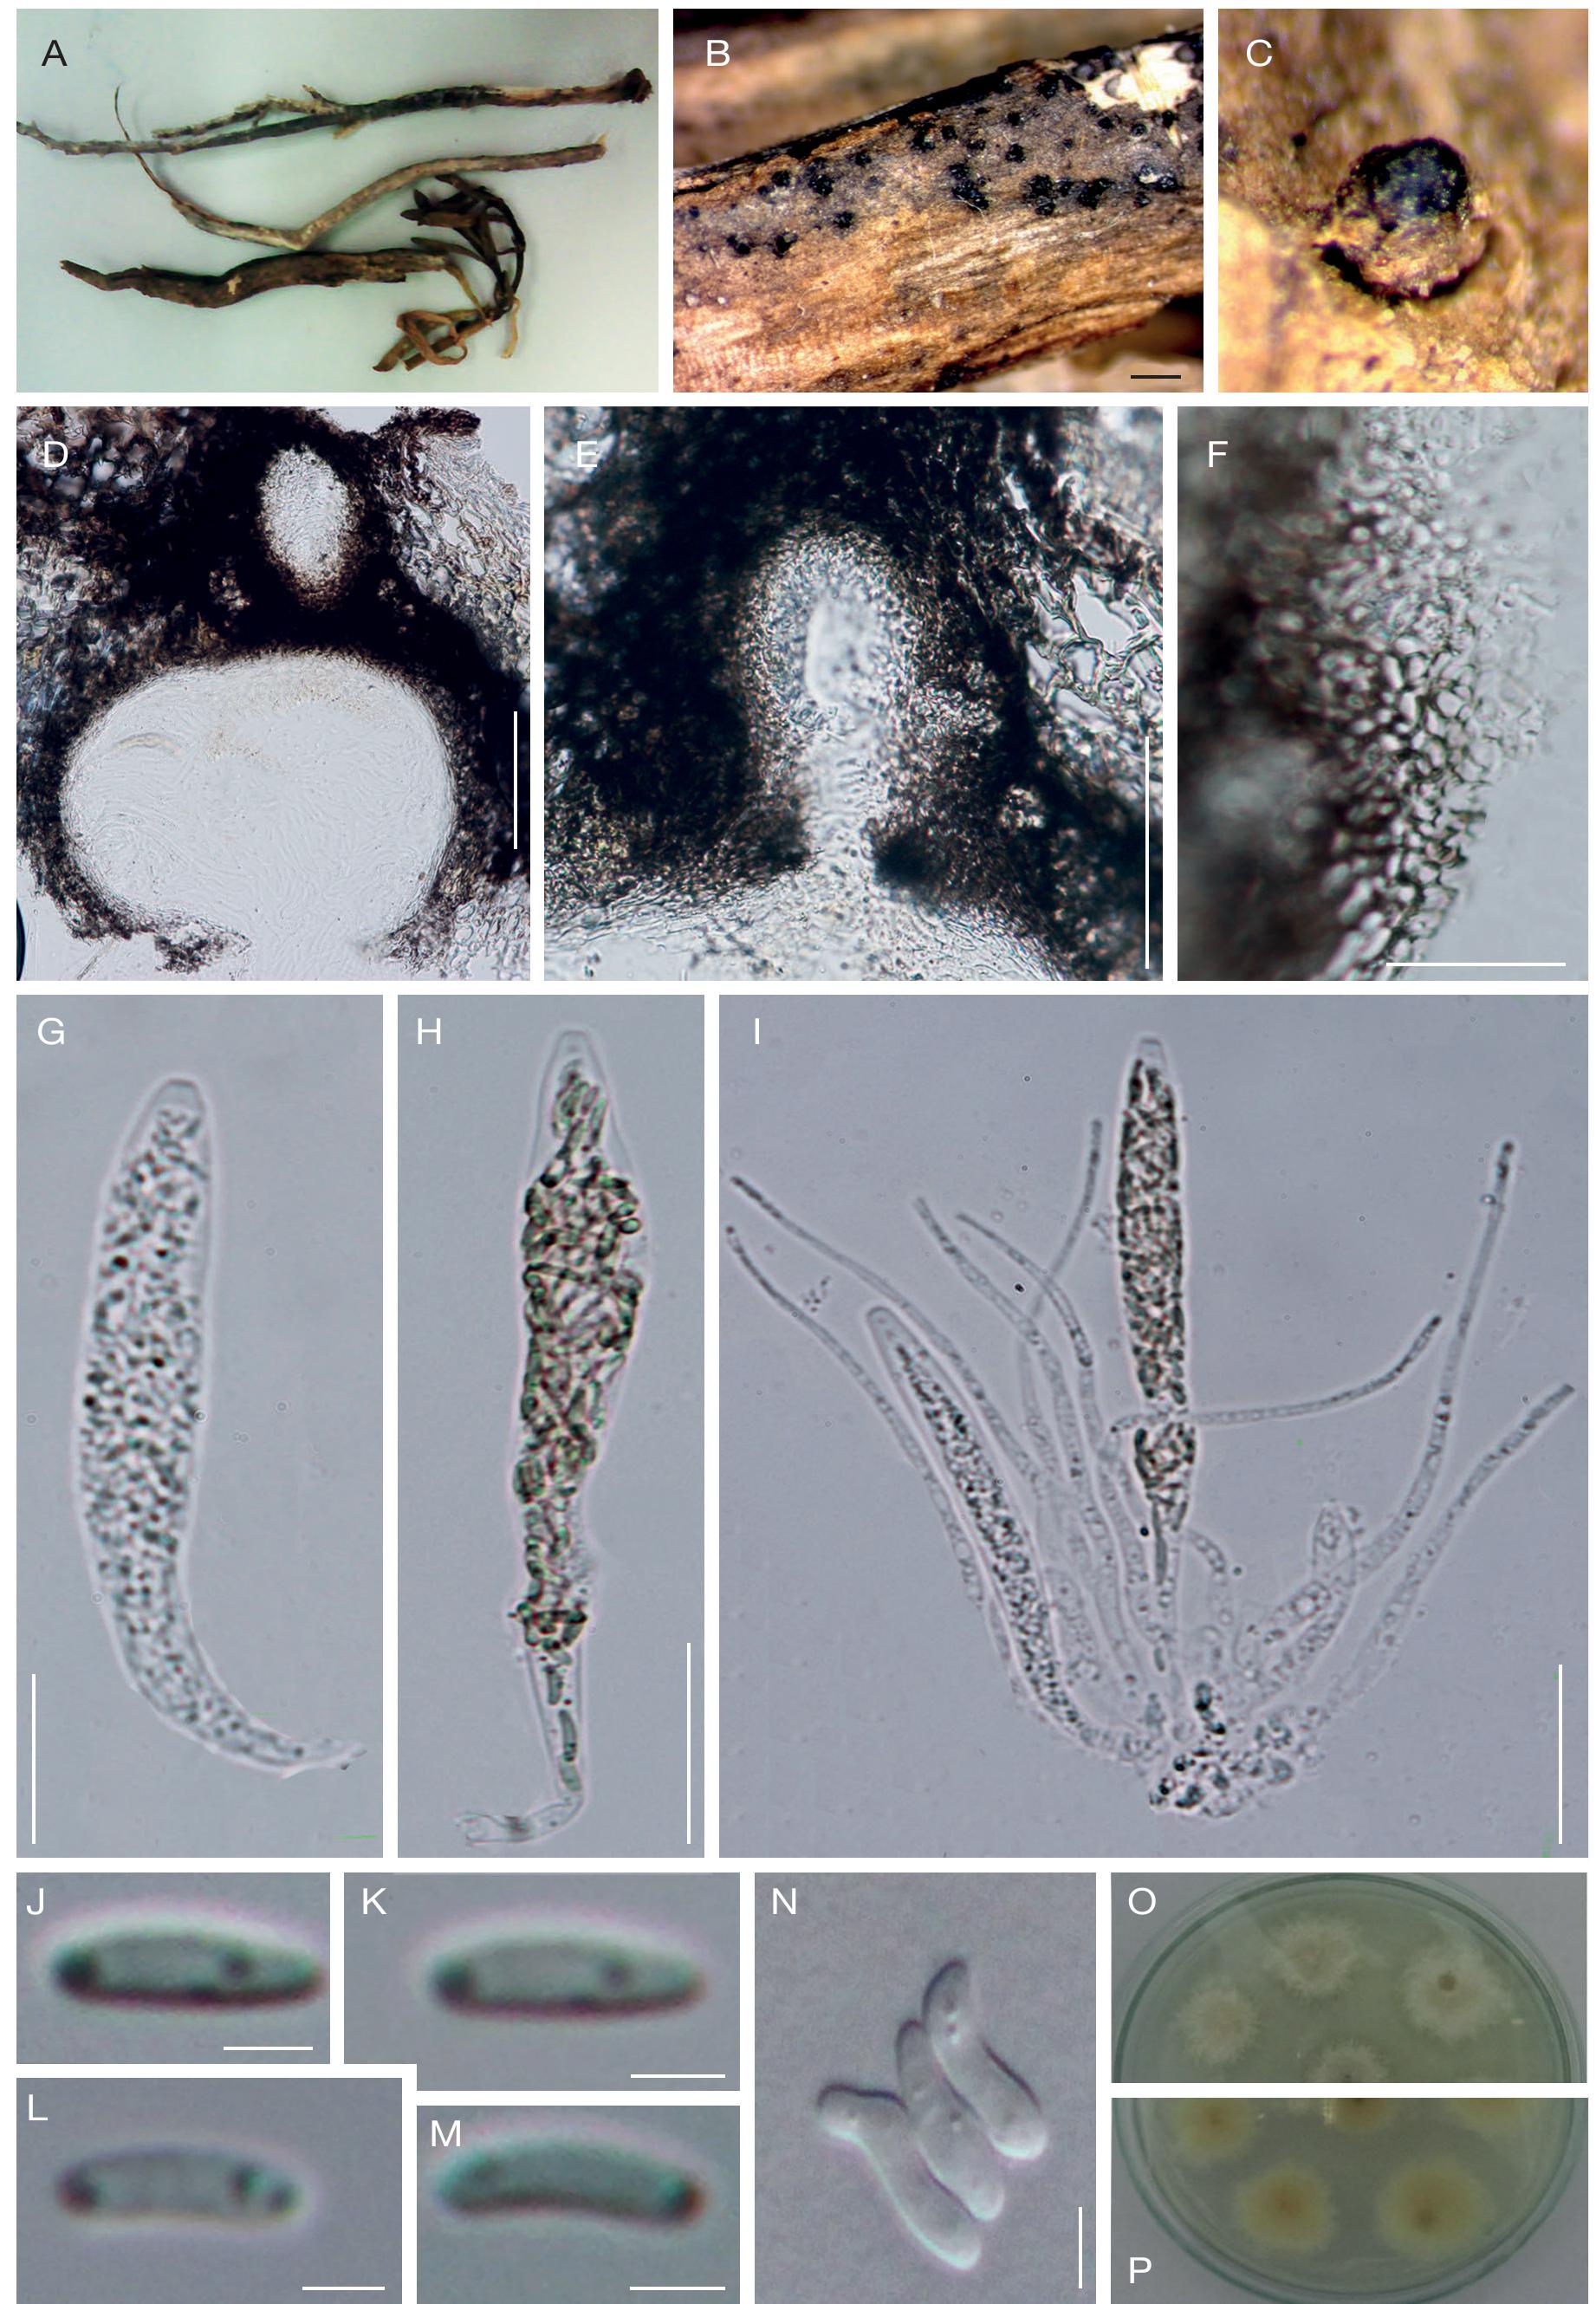 Modern Taxonomic Approaches To Identifying Diatrypaceous Fungi From Marine Habitats With A Novel Genus Halocryptovalsa Dayarathne K D Hyde Gen Nov